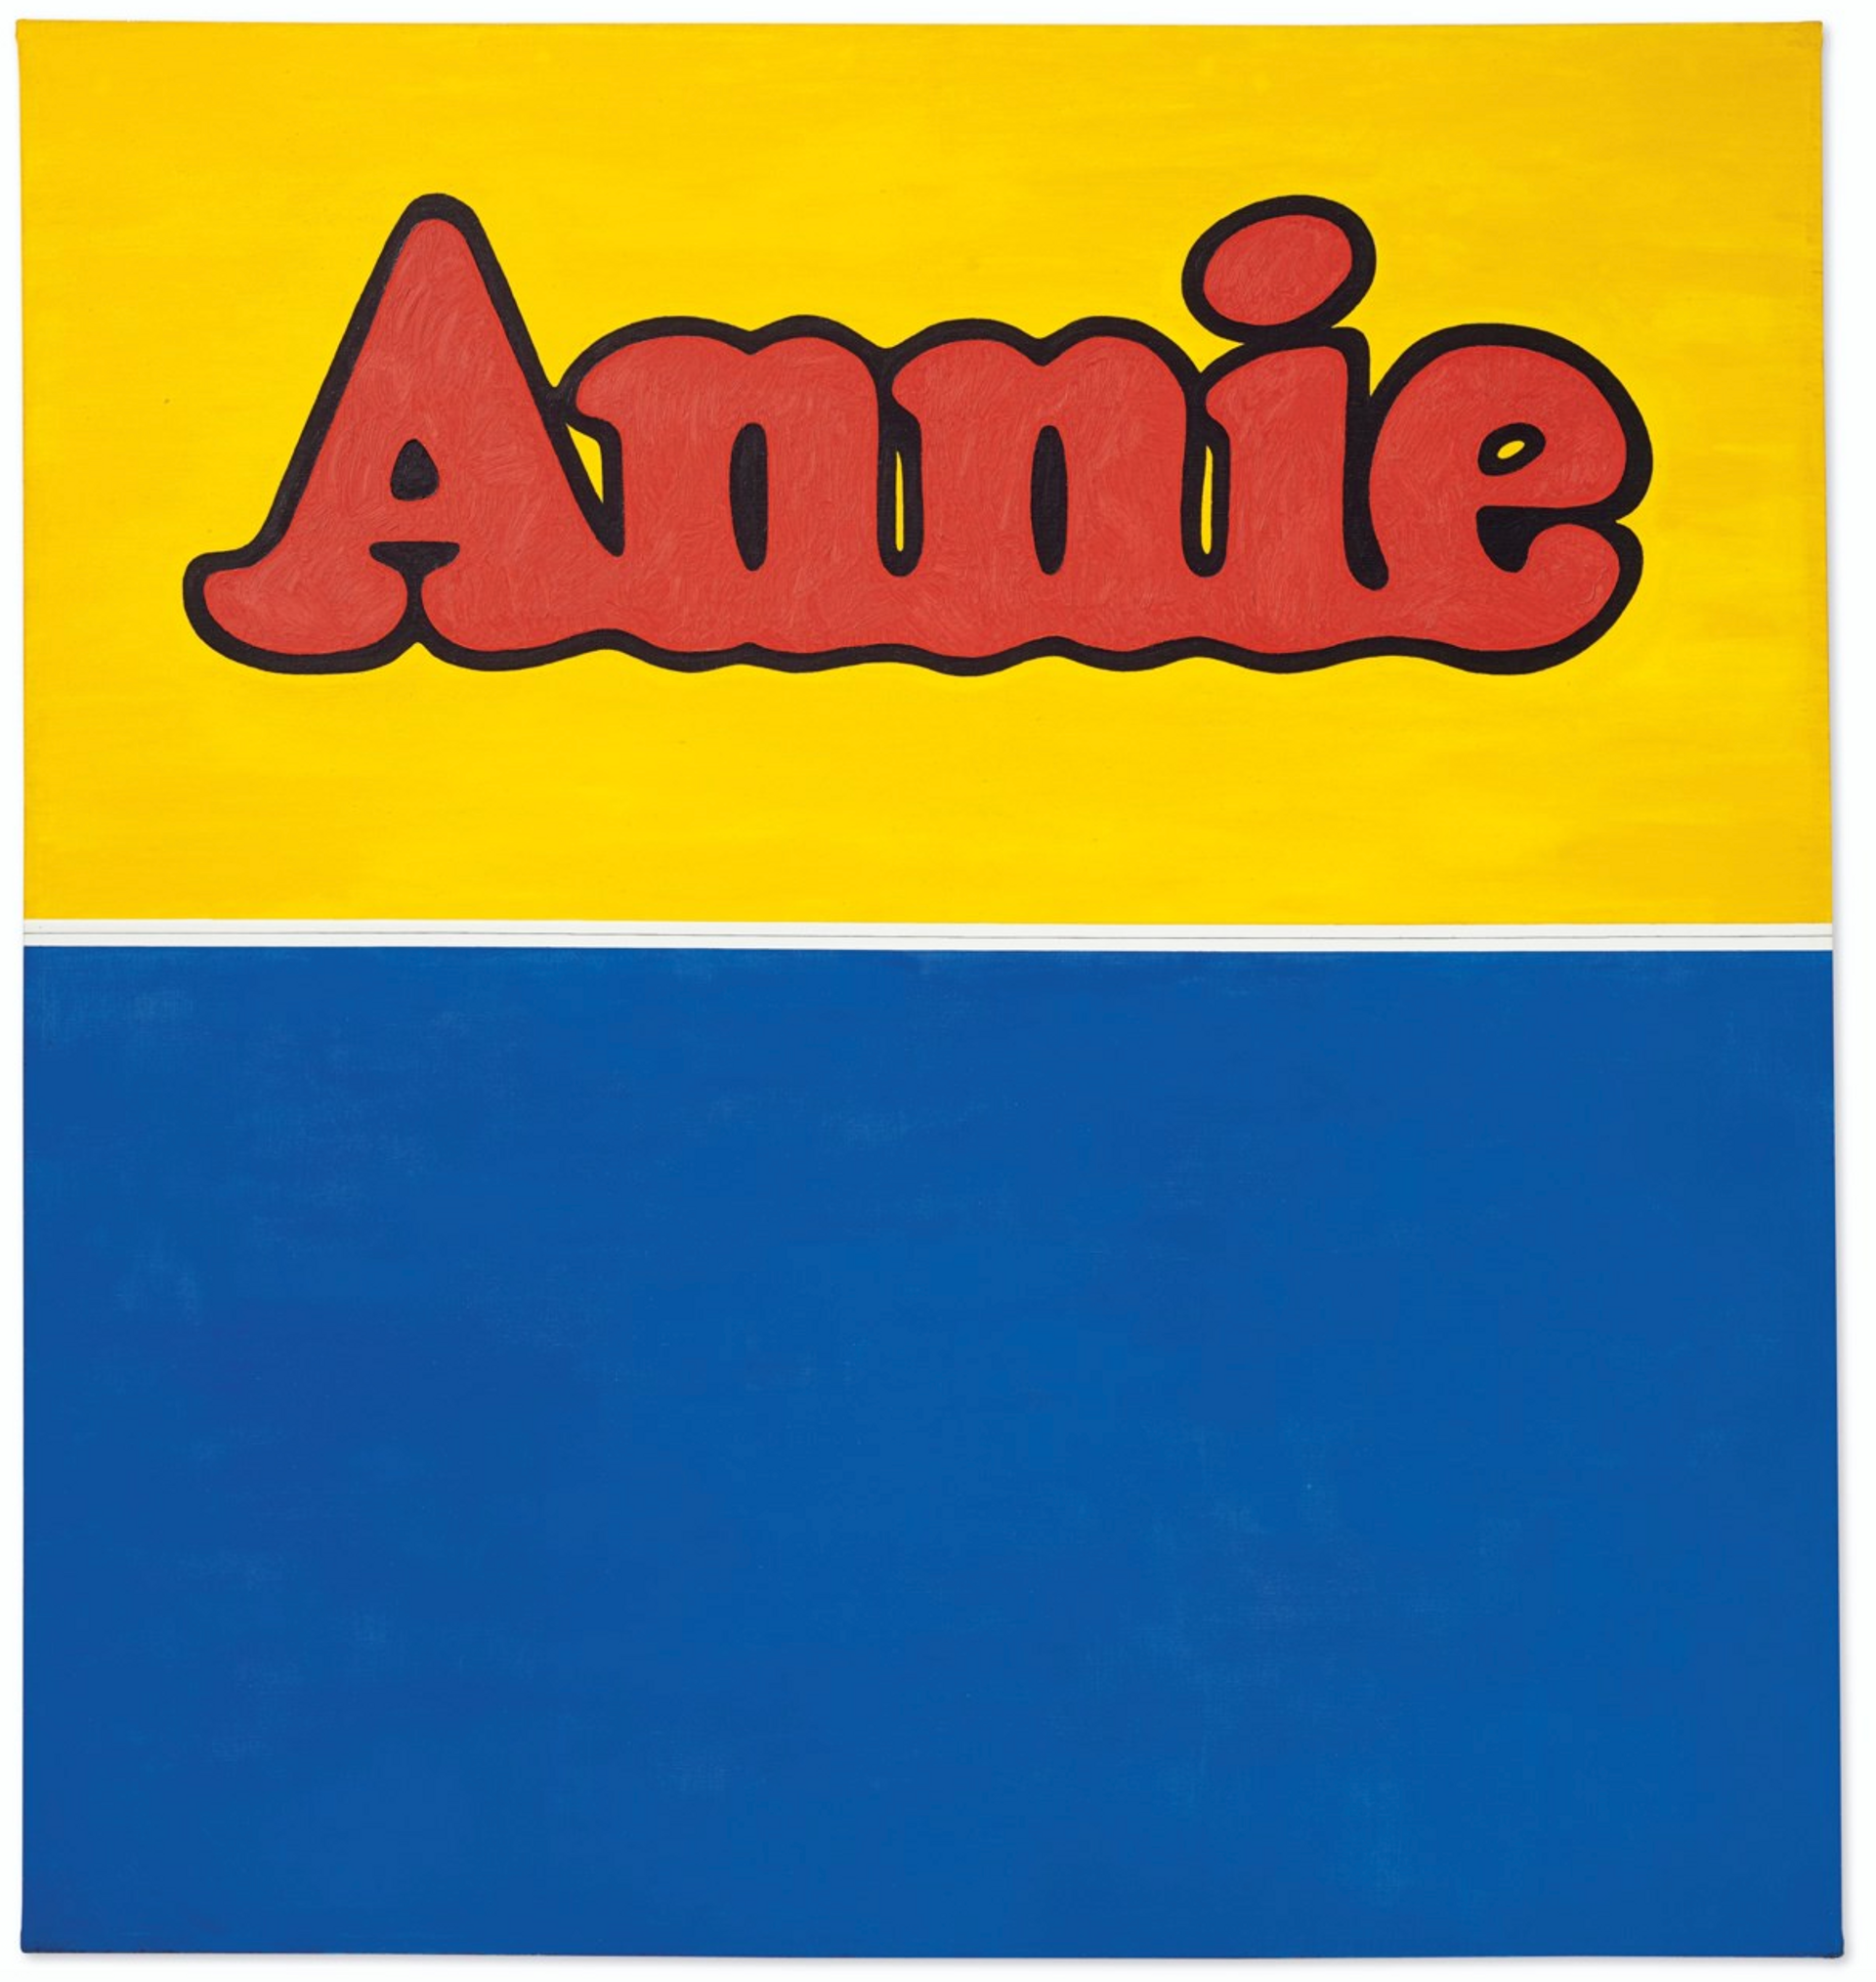 Painting of the word 'Annie' by Ed Ruscha in red lettering with a black outline. The background is yellow in the top half and blue in the bottom half.